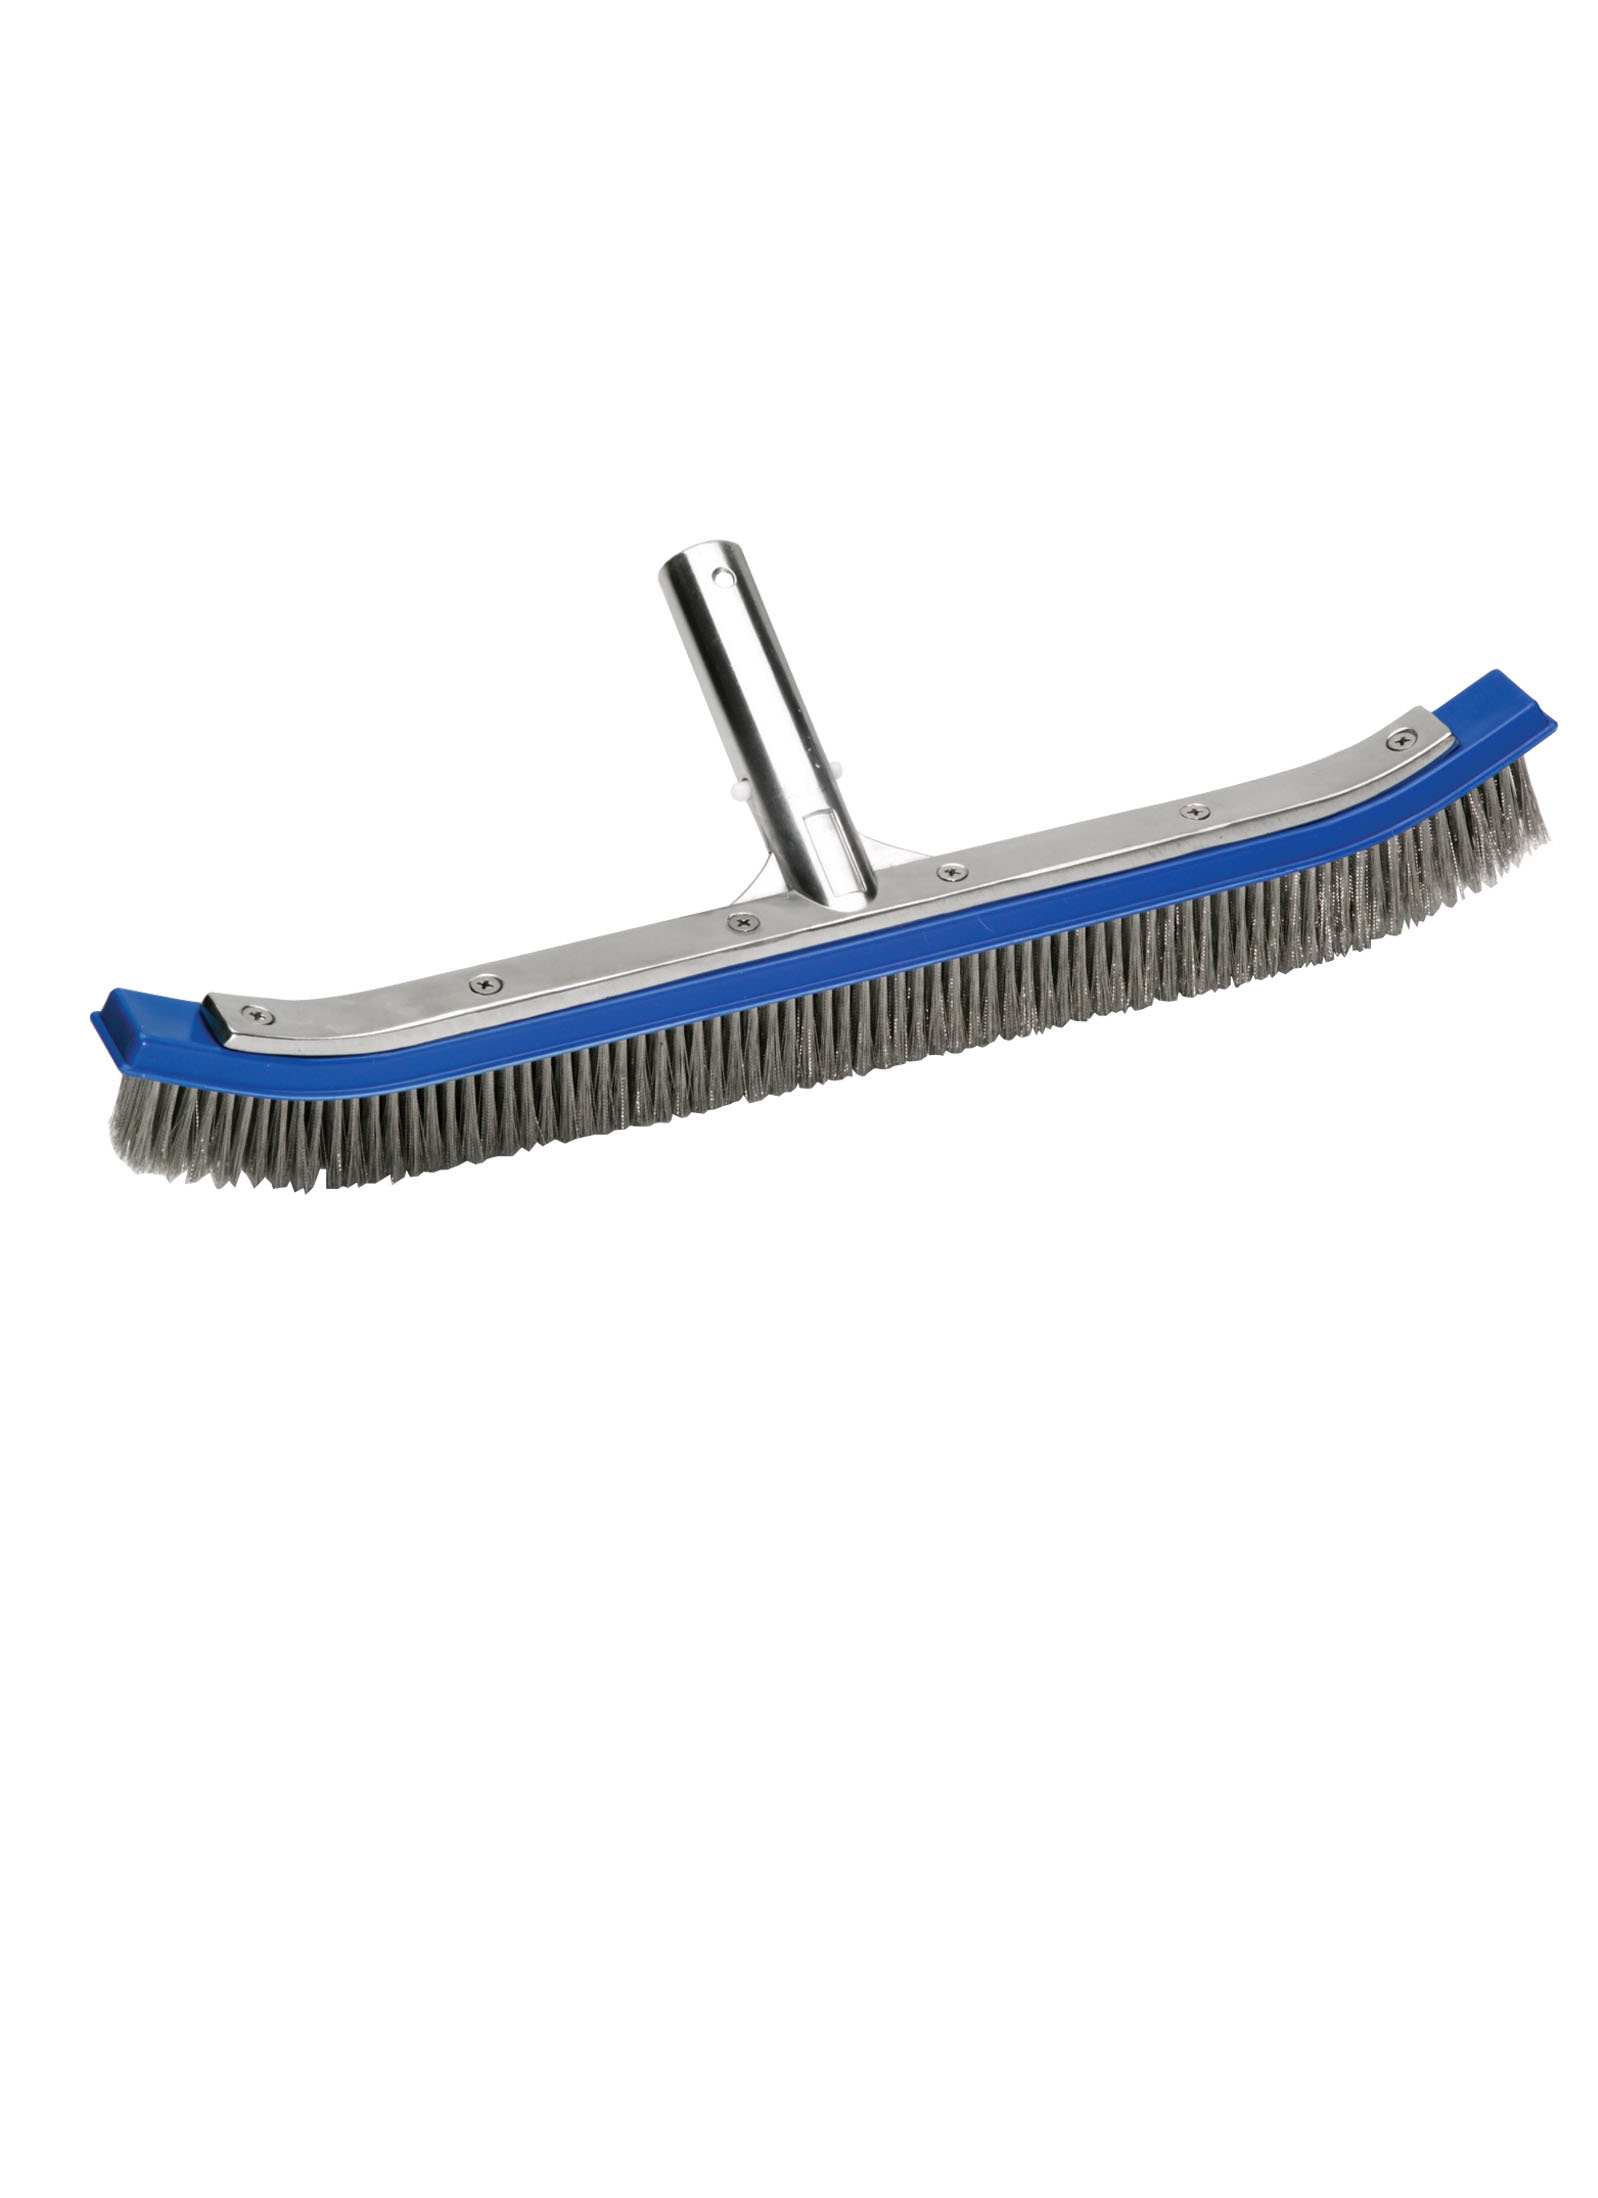 110017 18 Inch Algae Wall Brush - CLEARANCE SAFETY COVERS